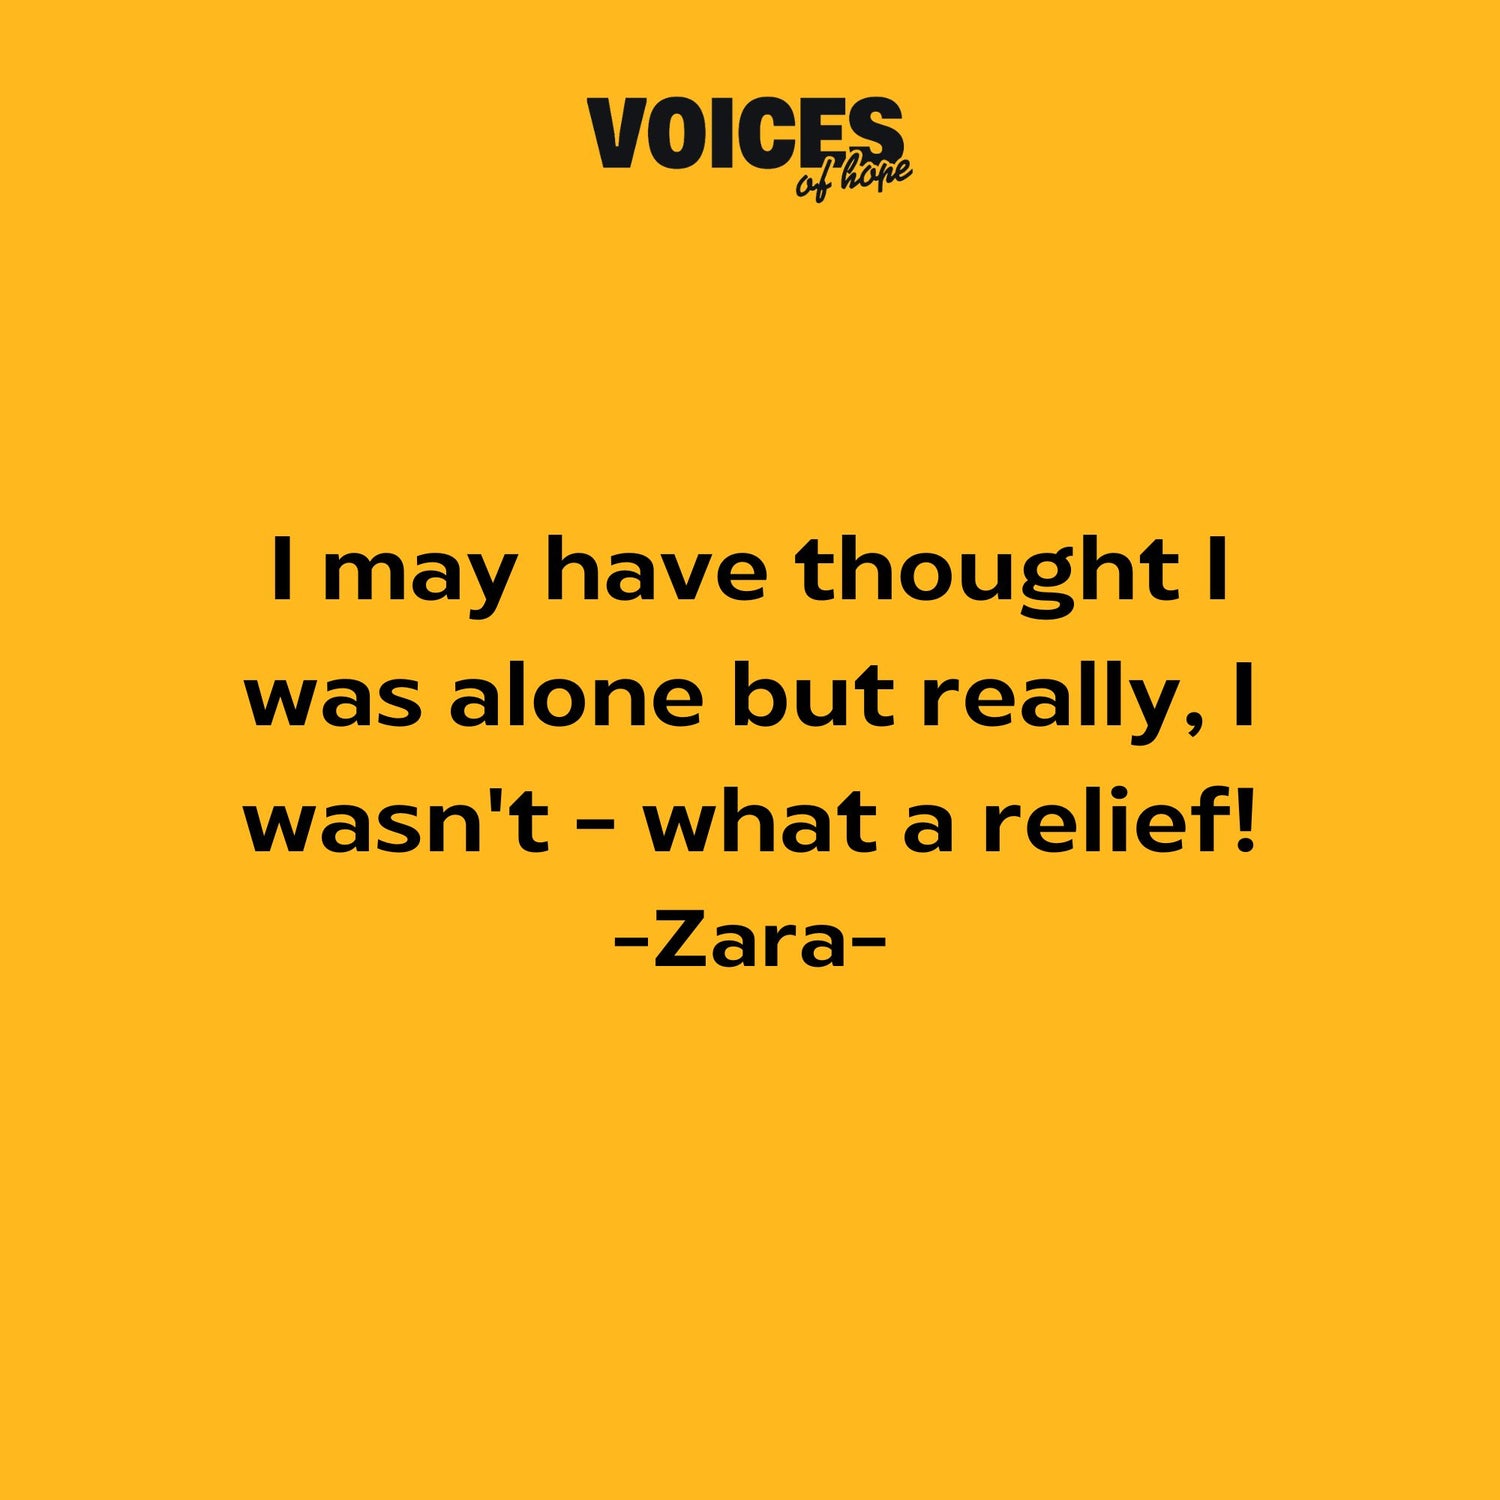 Yellow background with black writing that reads: "I may have thought I was alone but really, I wasn't - what a relief! Zara."